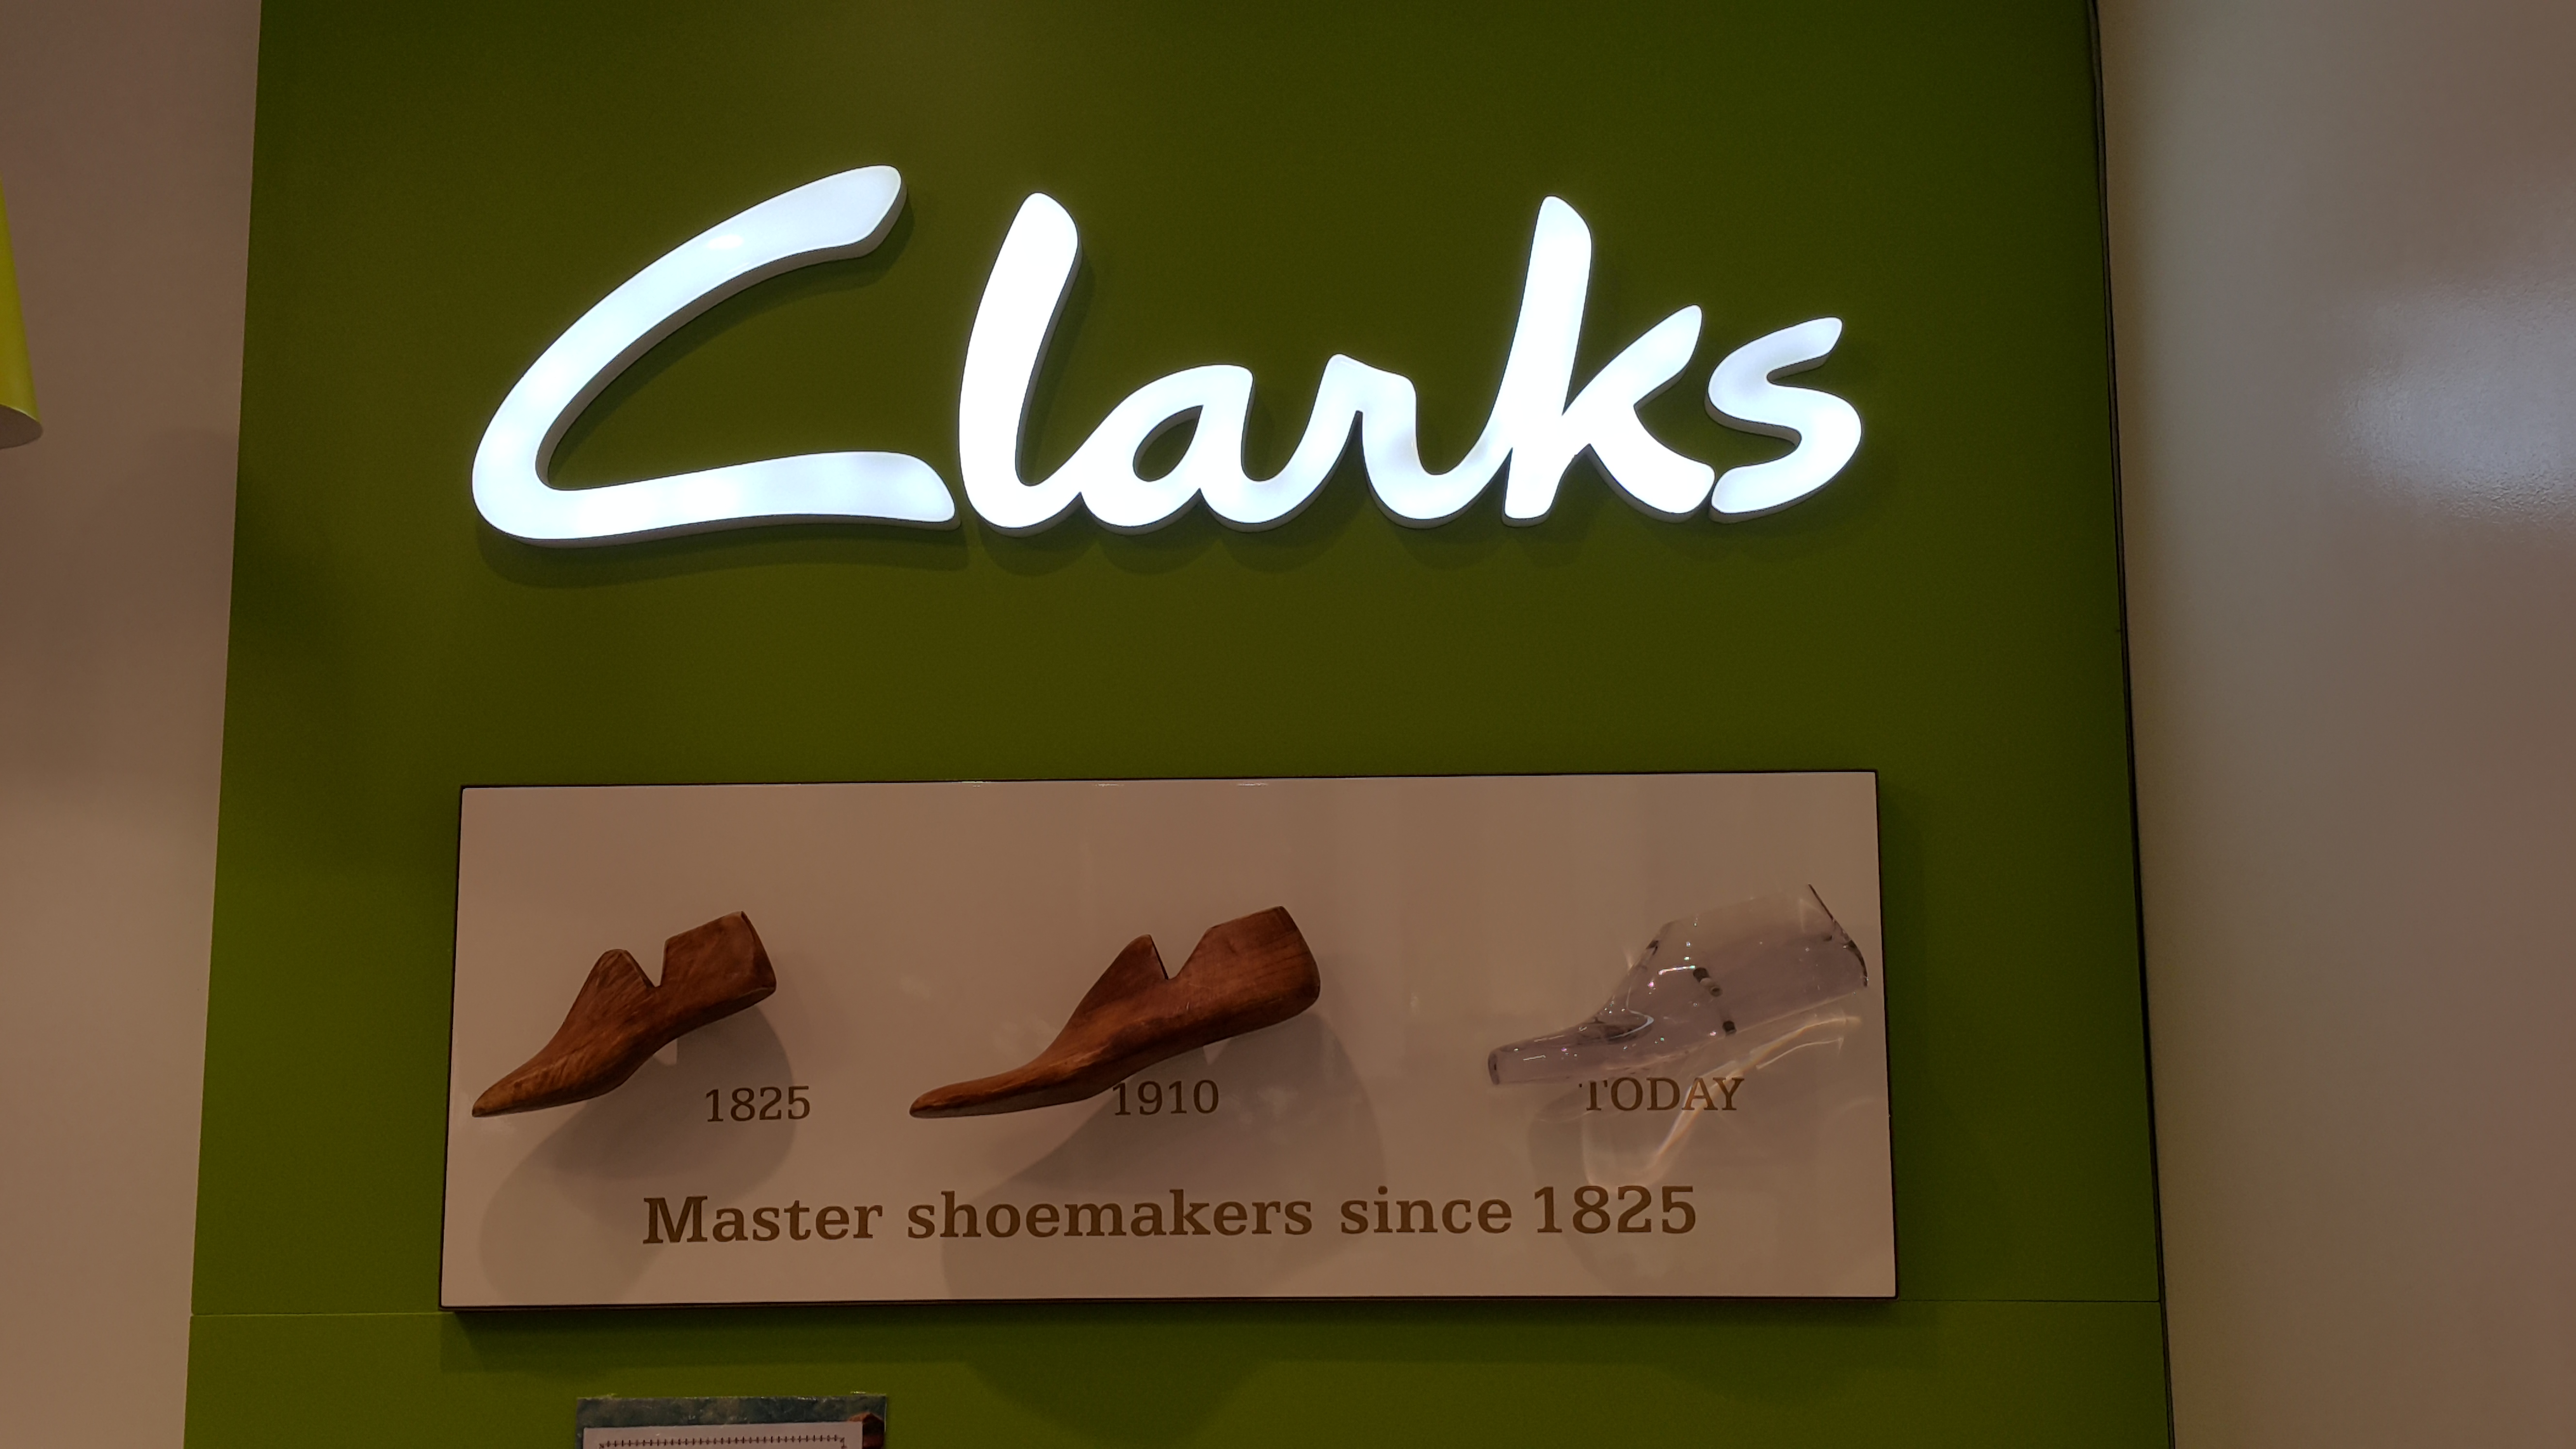 clarks shoes branches in lebanon